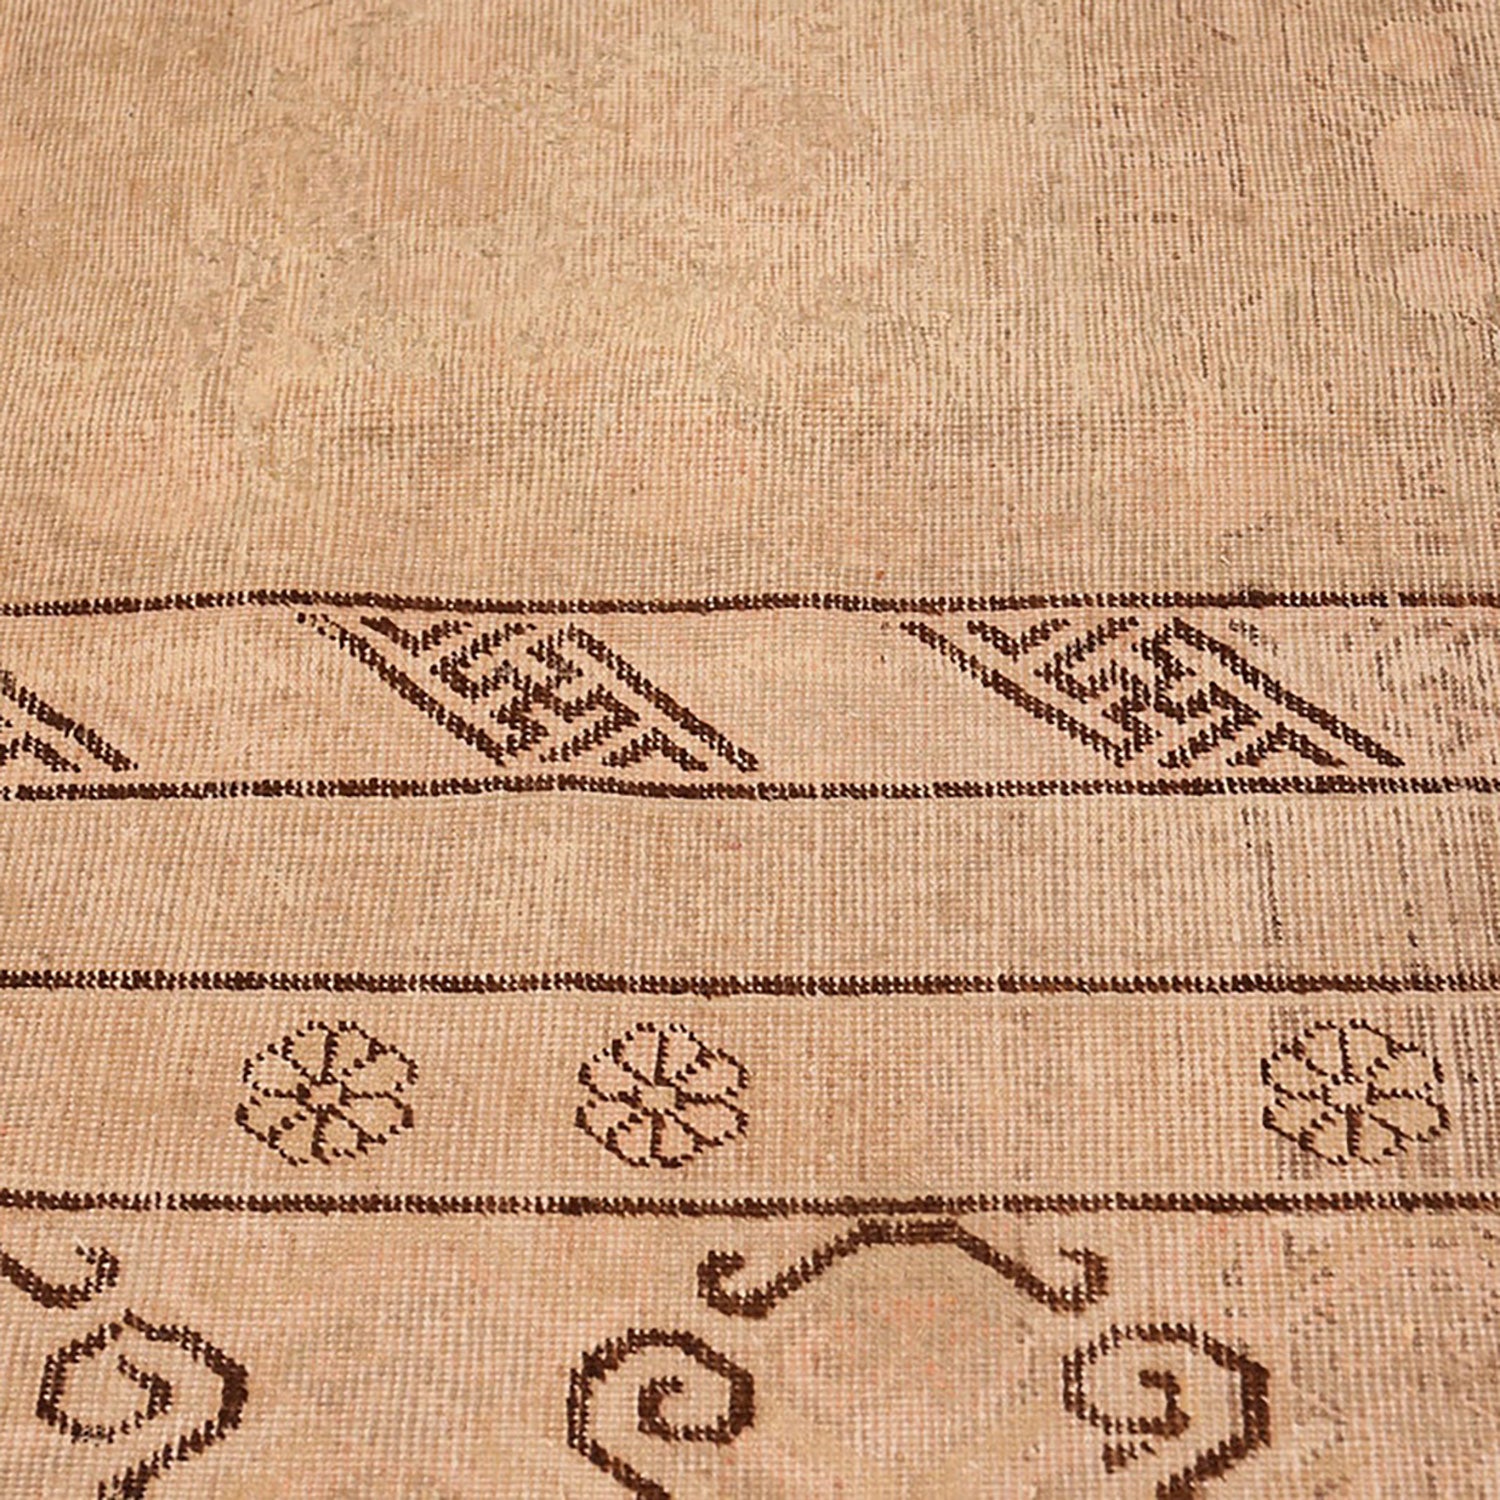 Traditional geometric patterns adorn a high-quality woven carpet with symmetry.